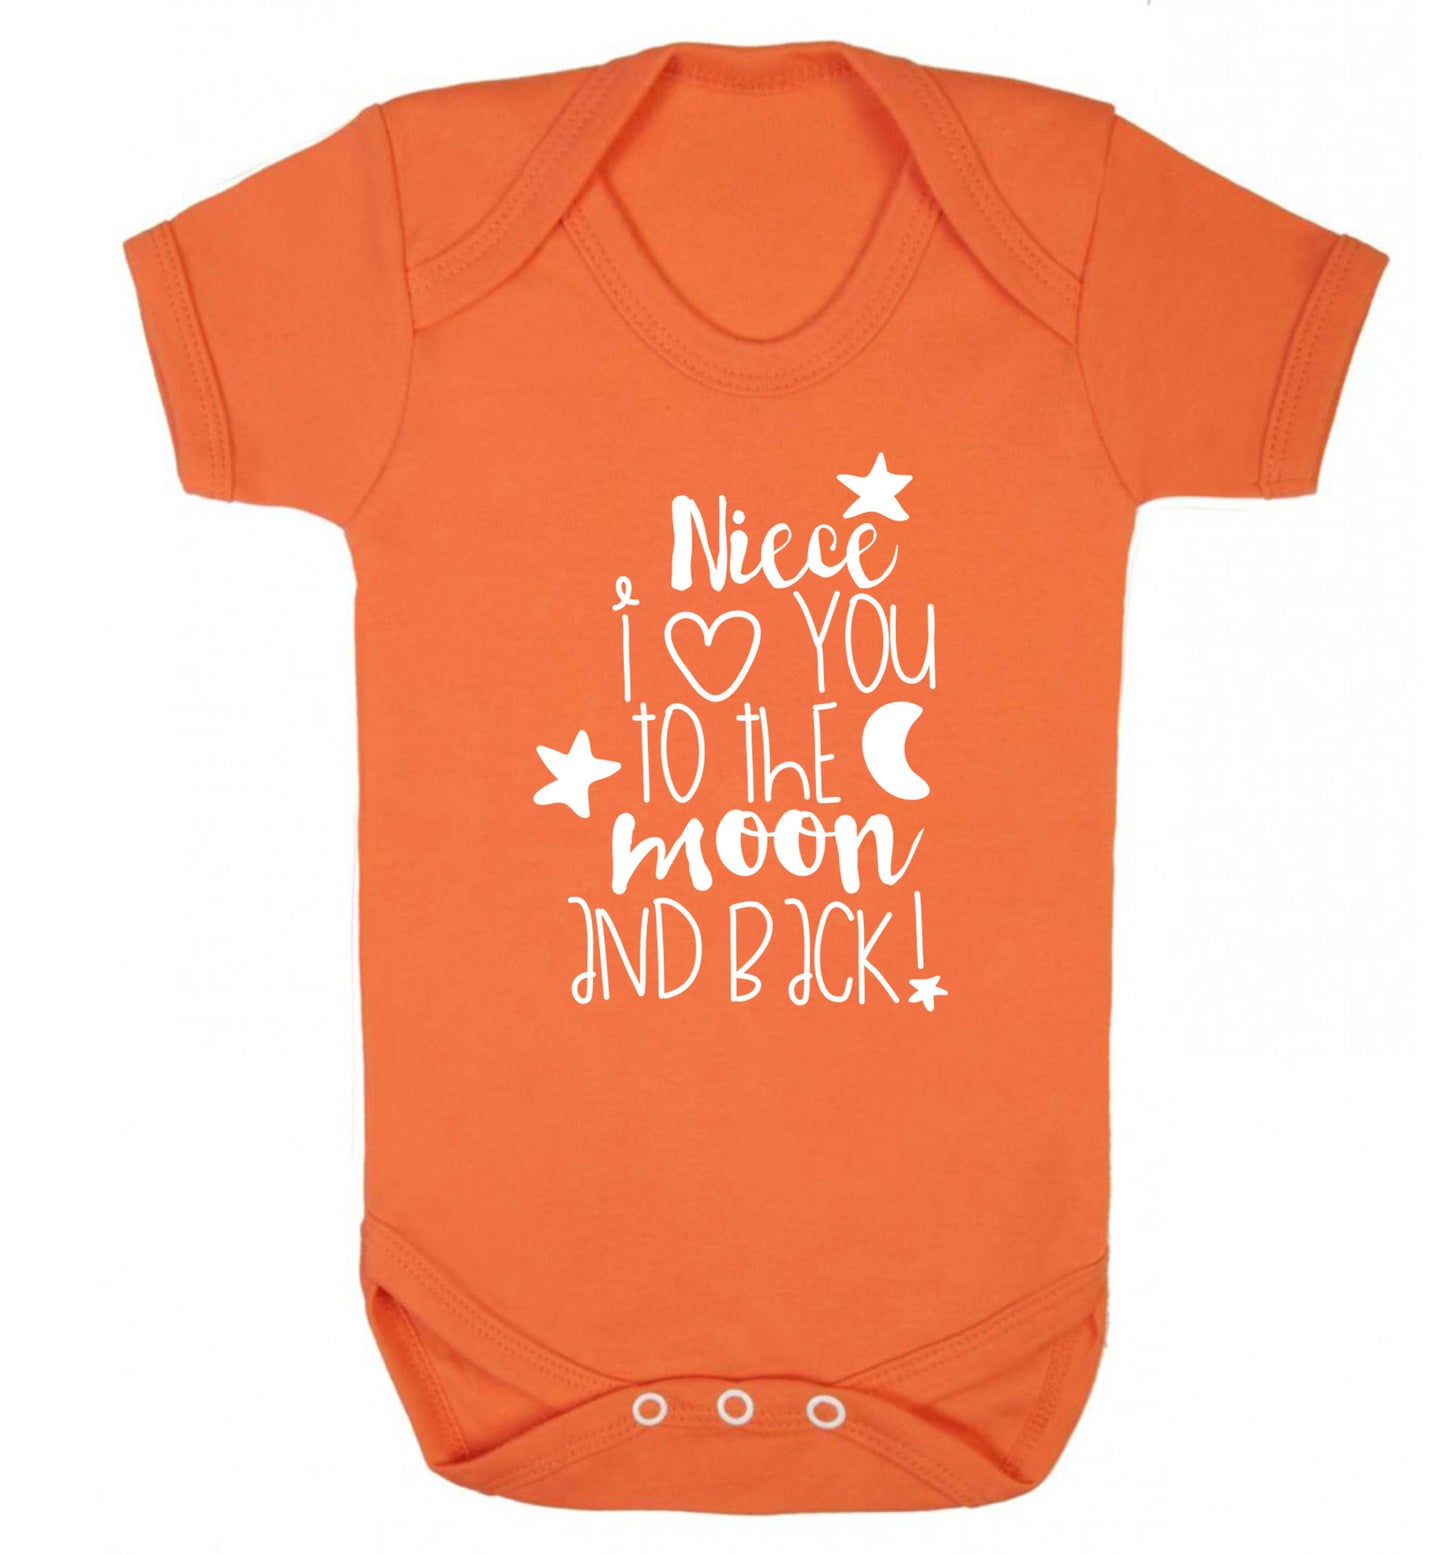 Niece I love you to the moon and back Baby Vest orange 18-24 months